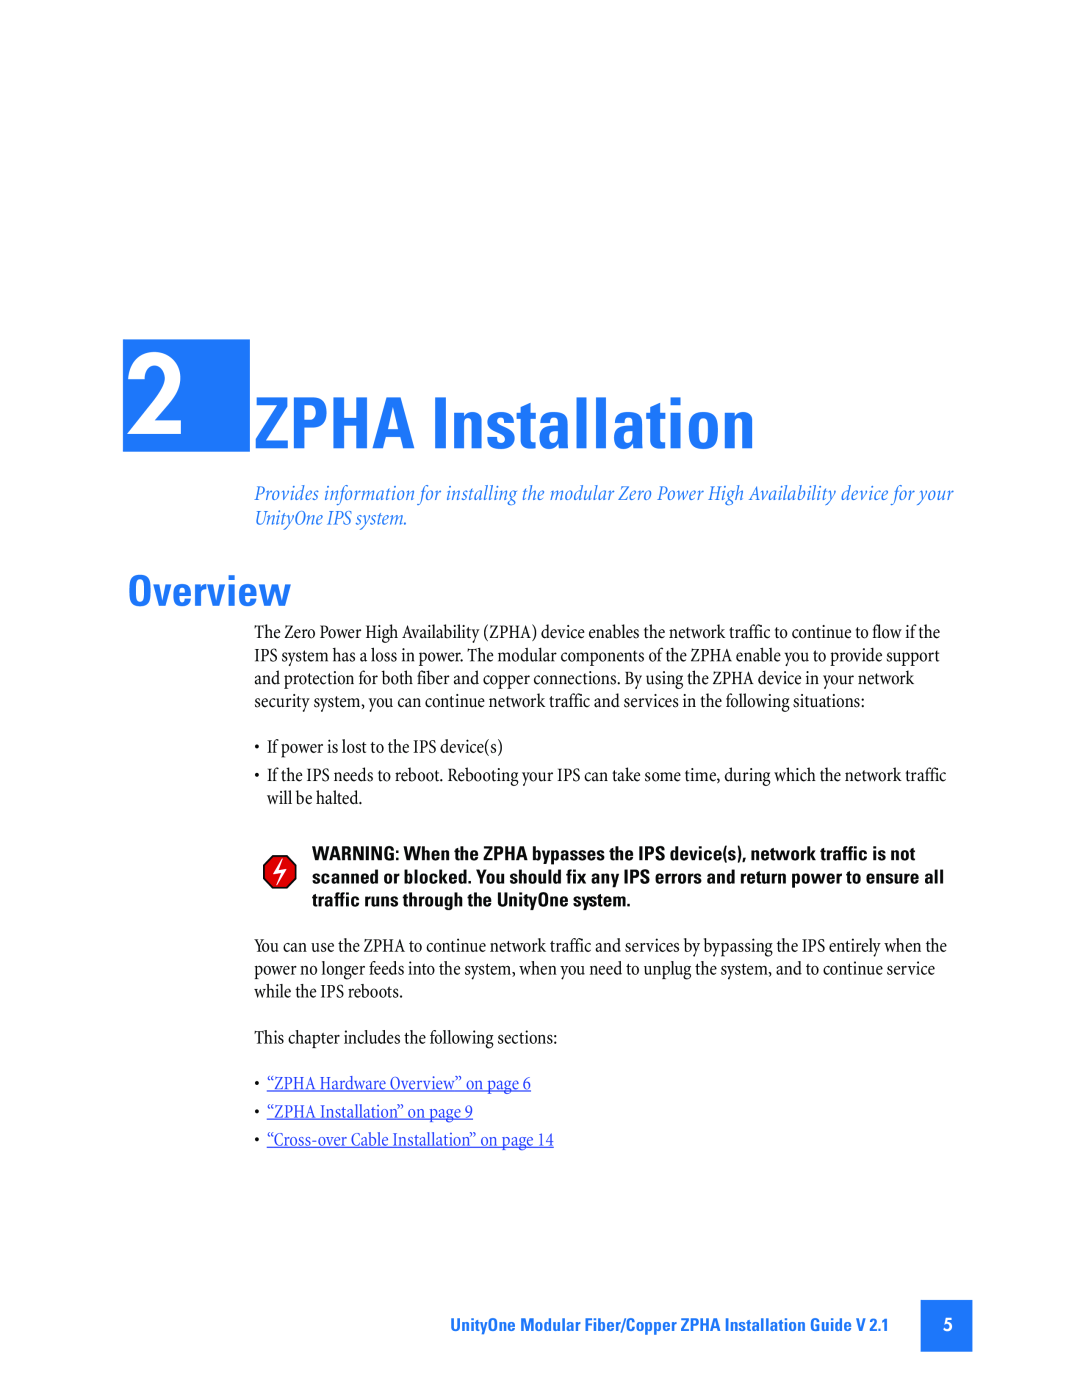 3Com TECHD-0000000050 manual “ZPHA Hardware Overview” on page “ZPHA Installation” on page 